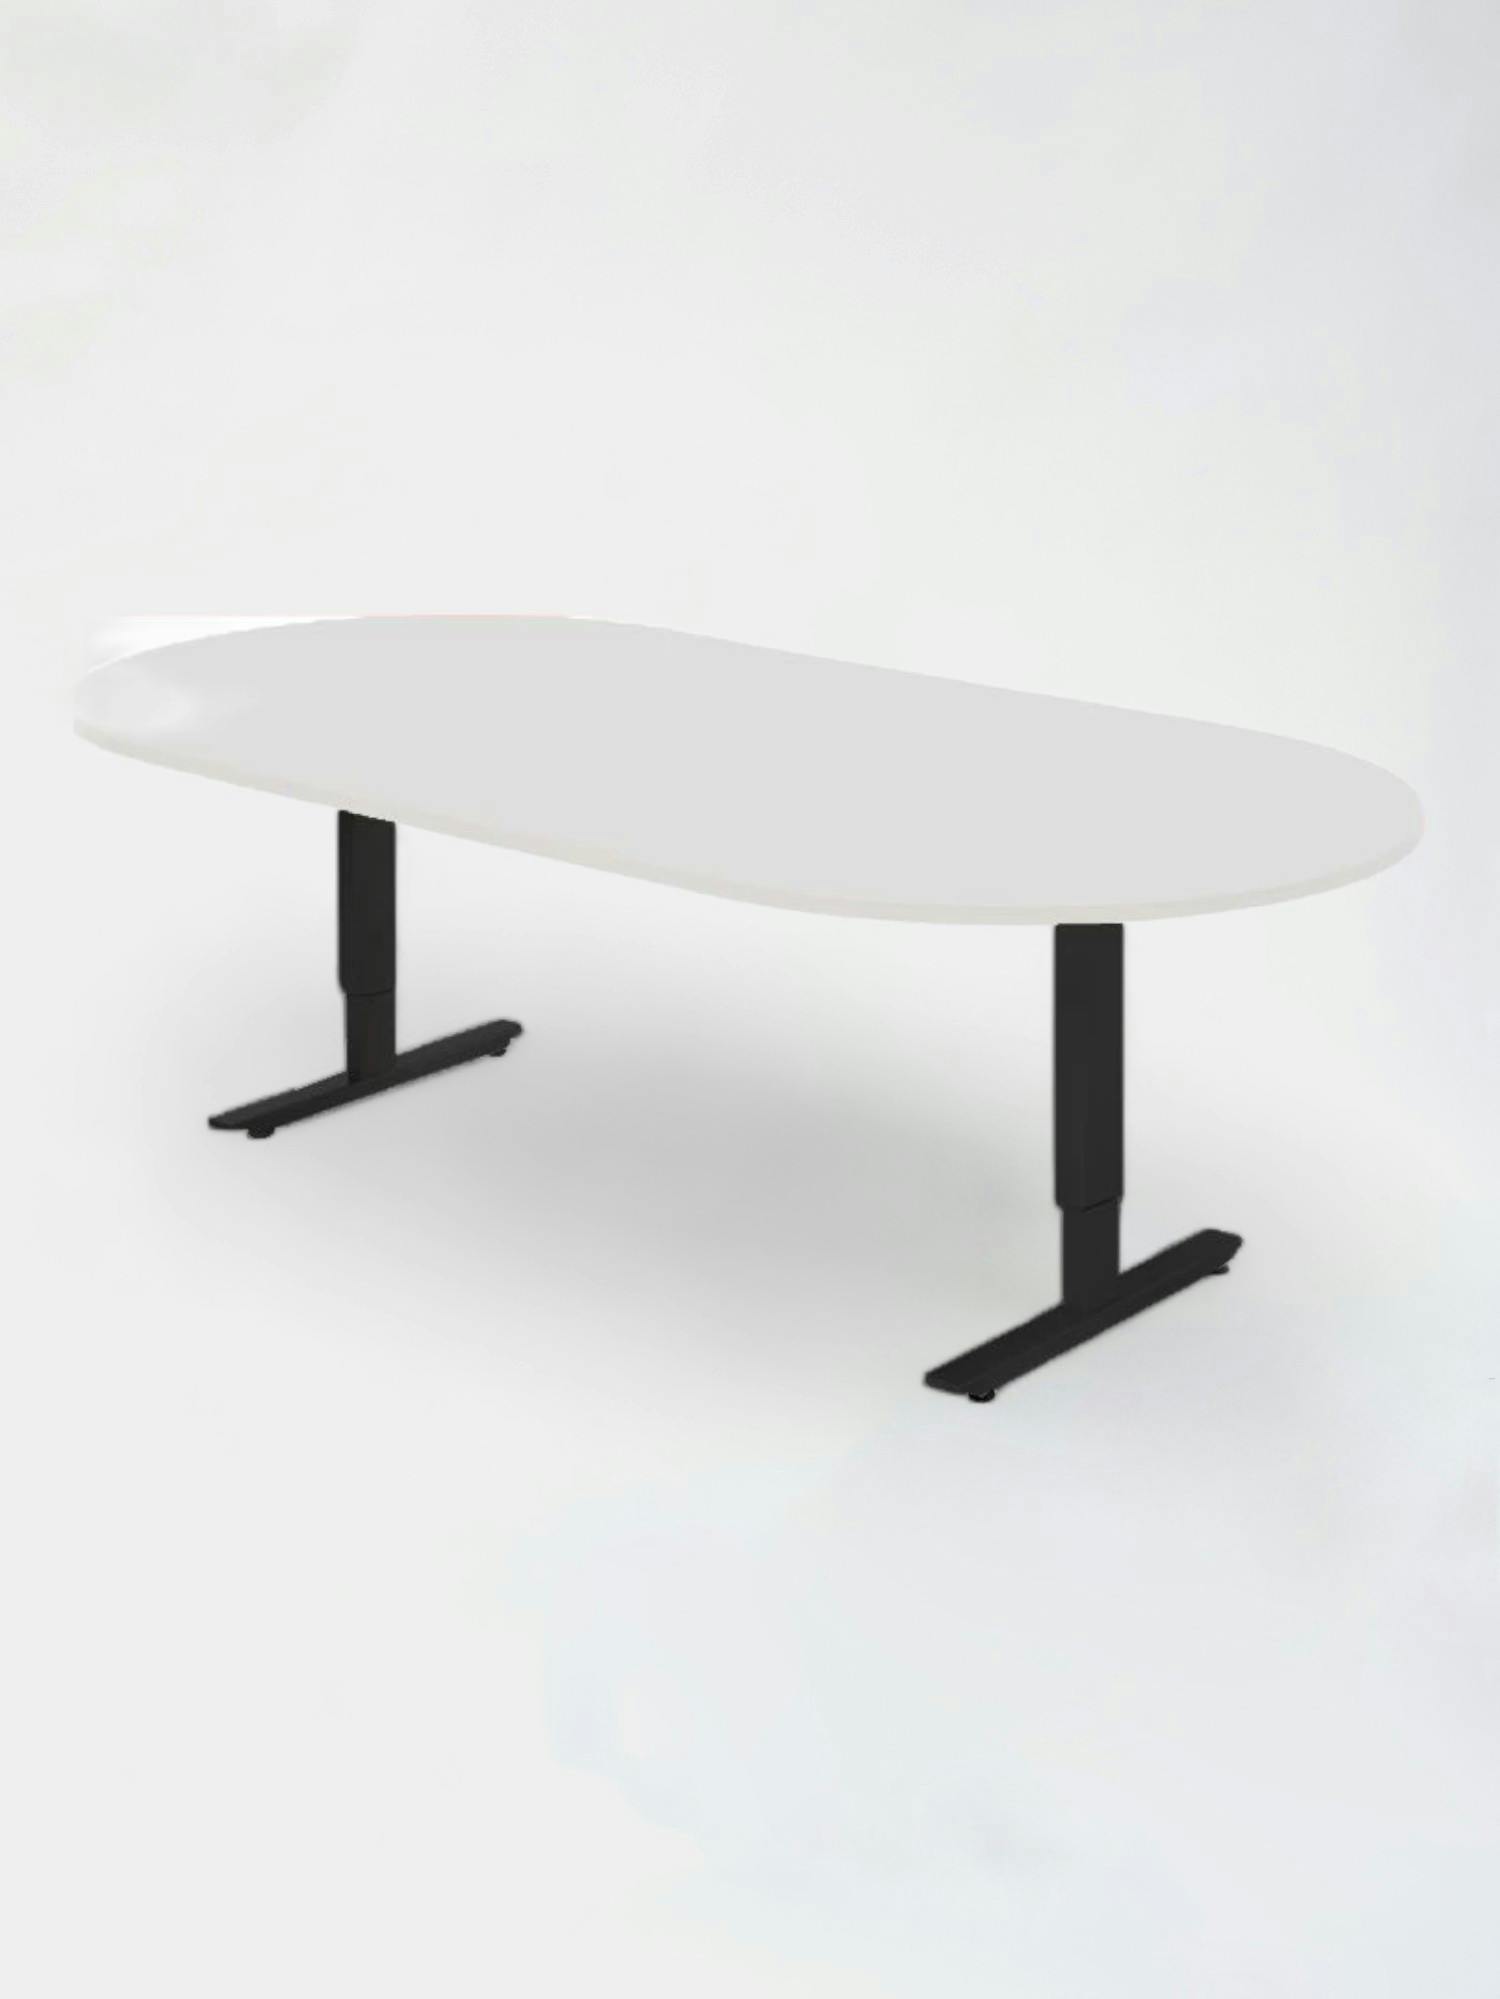 Oval meeting table, white top, black legs - Relieve Furniture